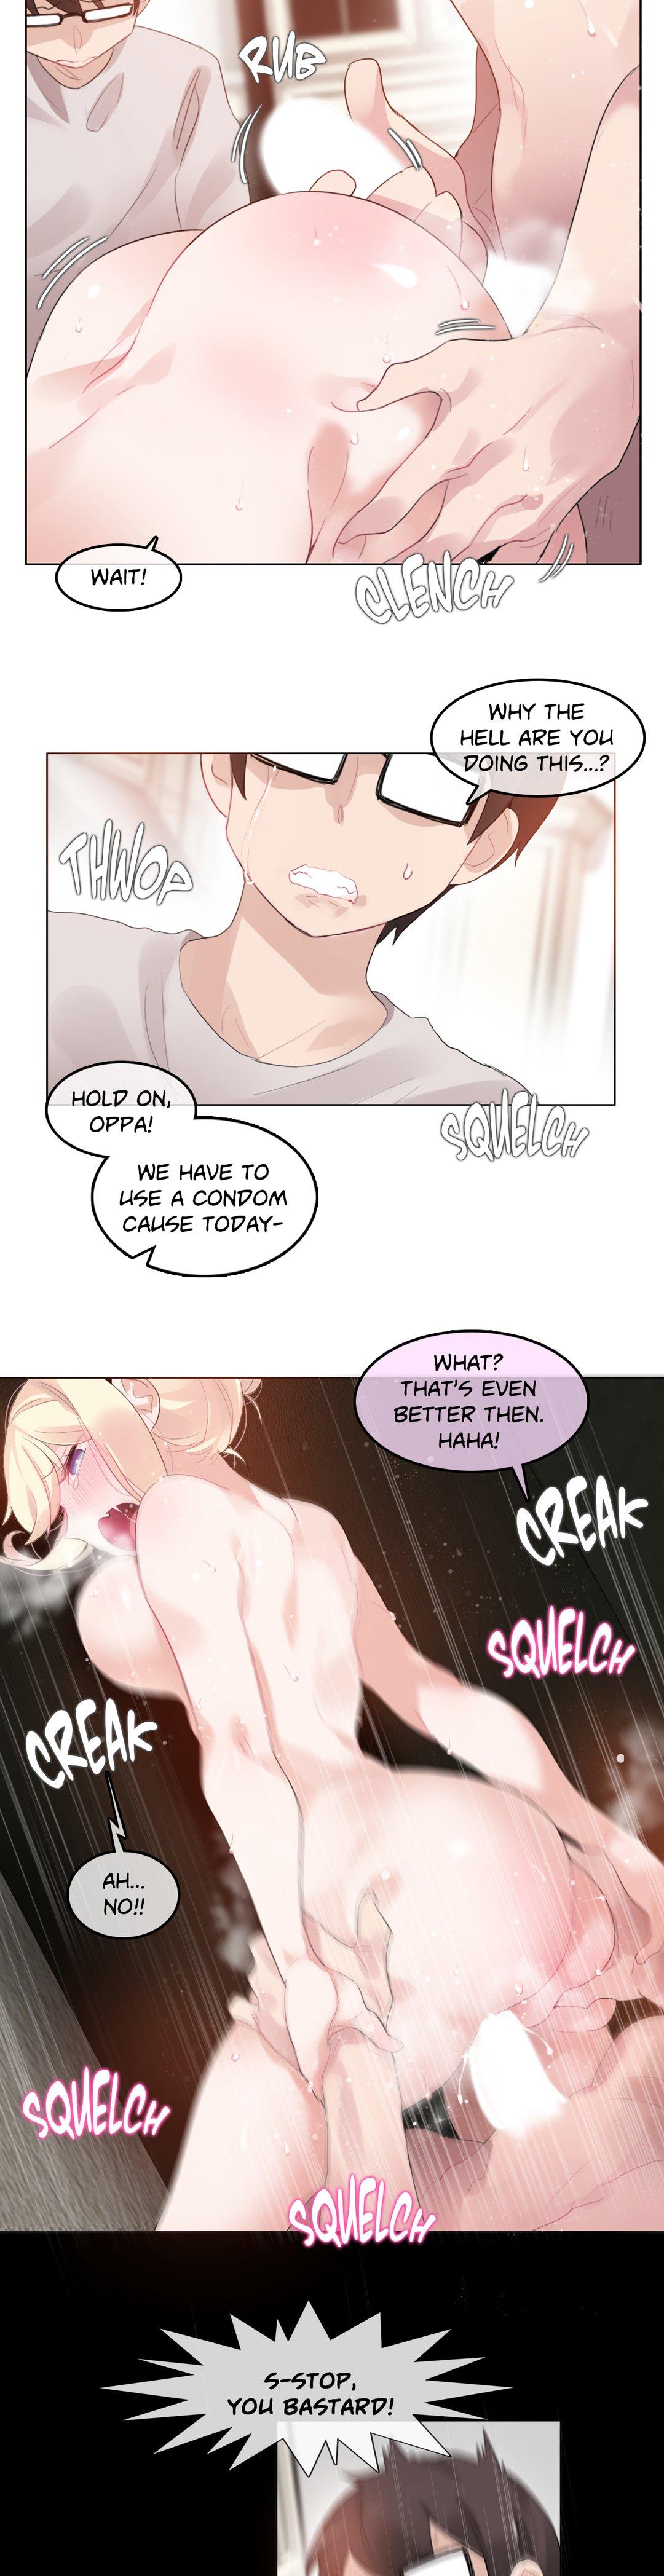 A Pervert's Daily Life • Chapter 51-55 65